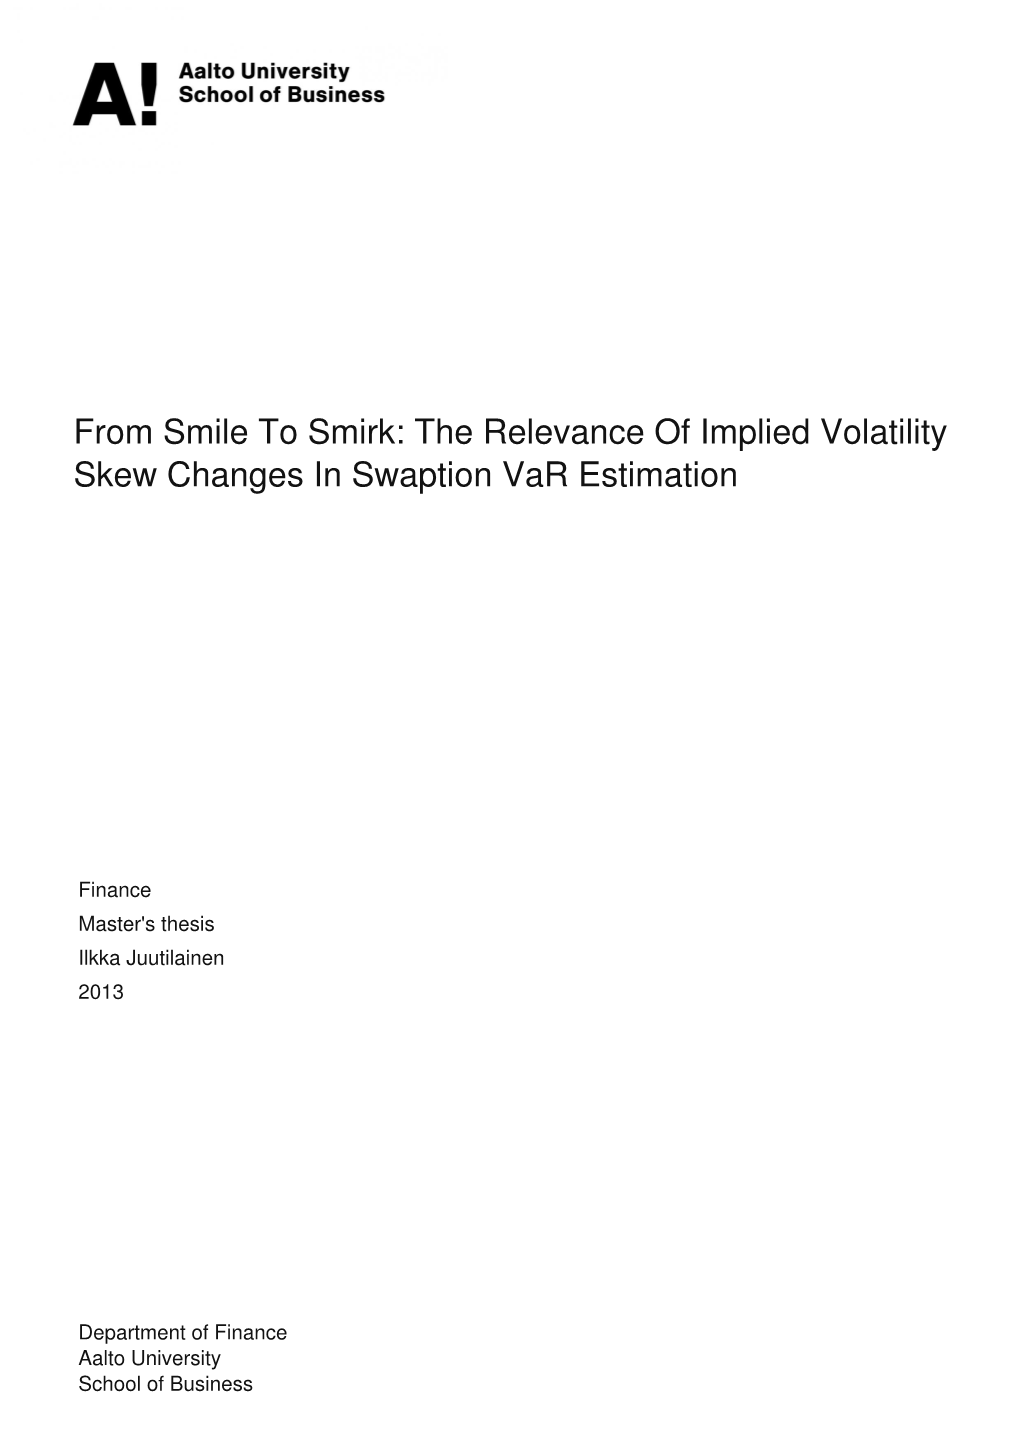 The Relevance of Implied Volatility Skew Changes in Swaption Var Estimation